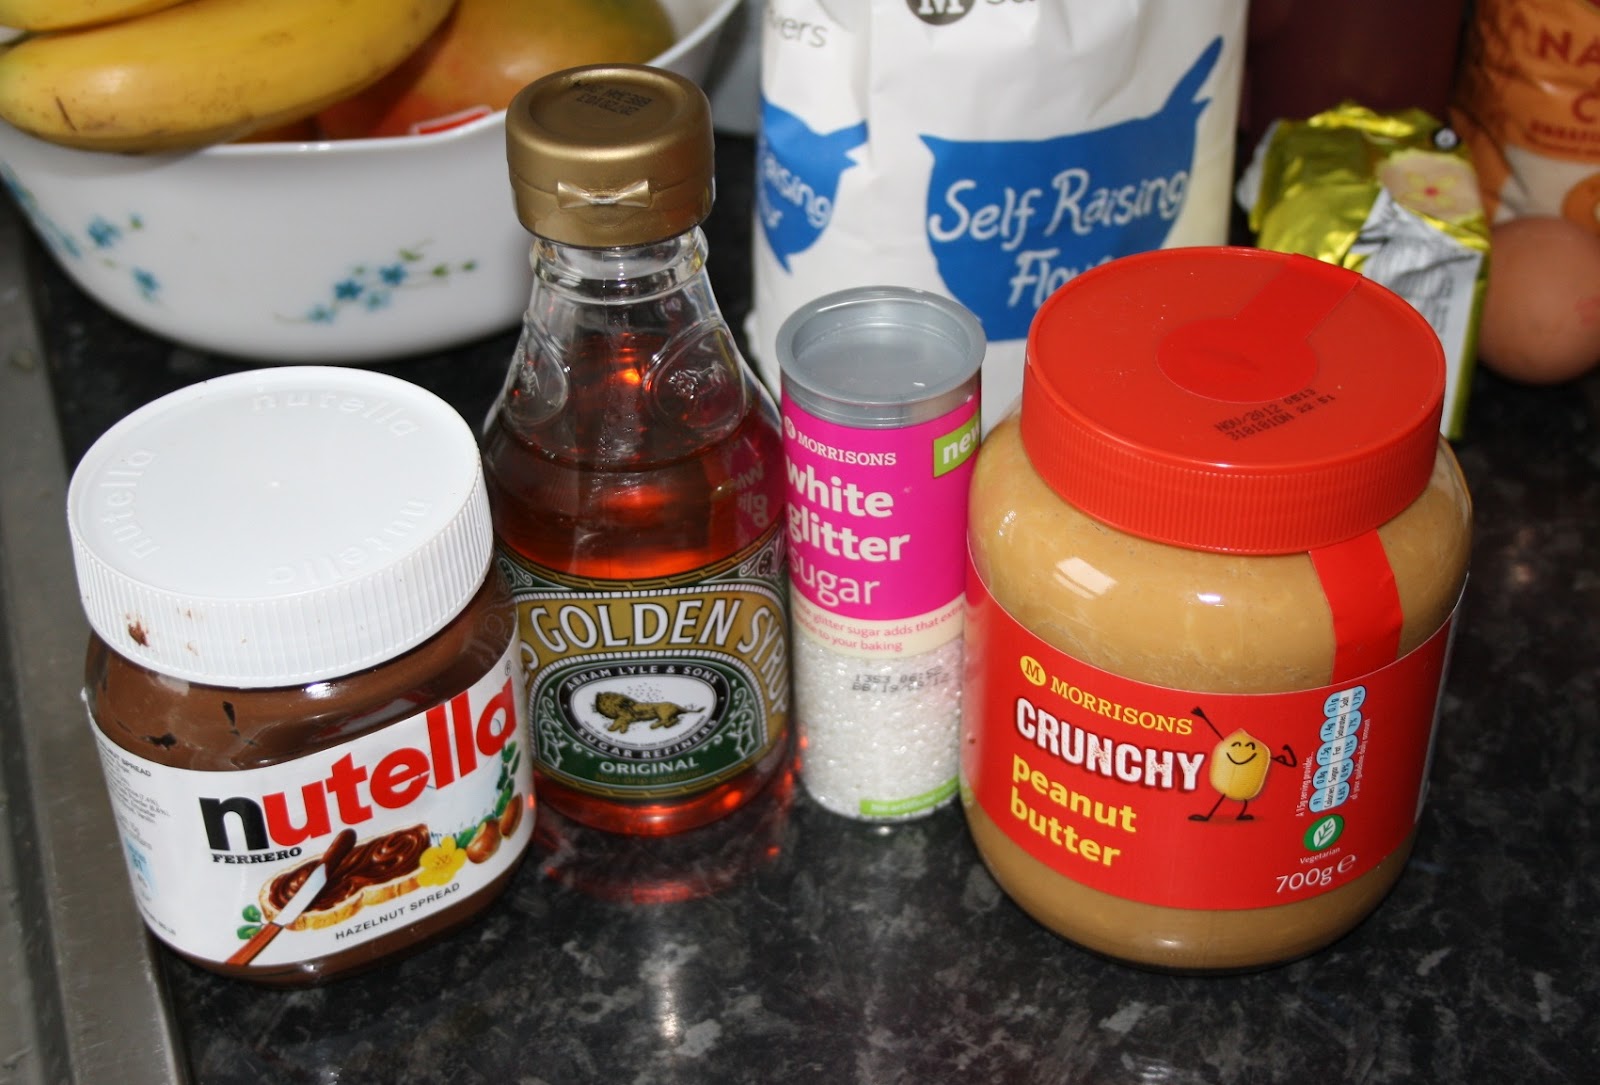 of top pancakes Nutella, to the   how Anything  fancy on you make Golden fluffier pancakes! putting